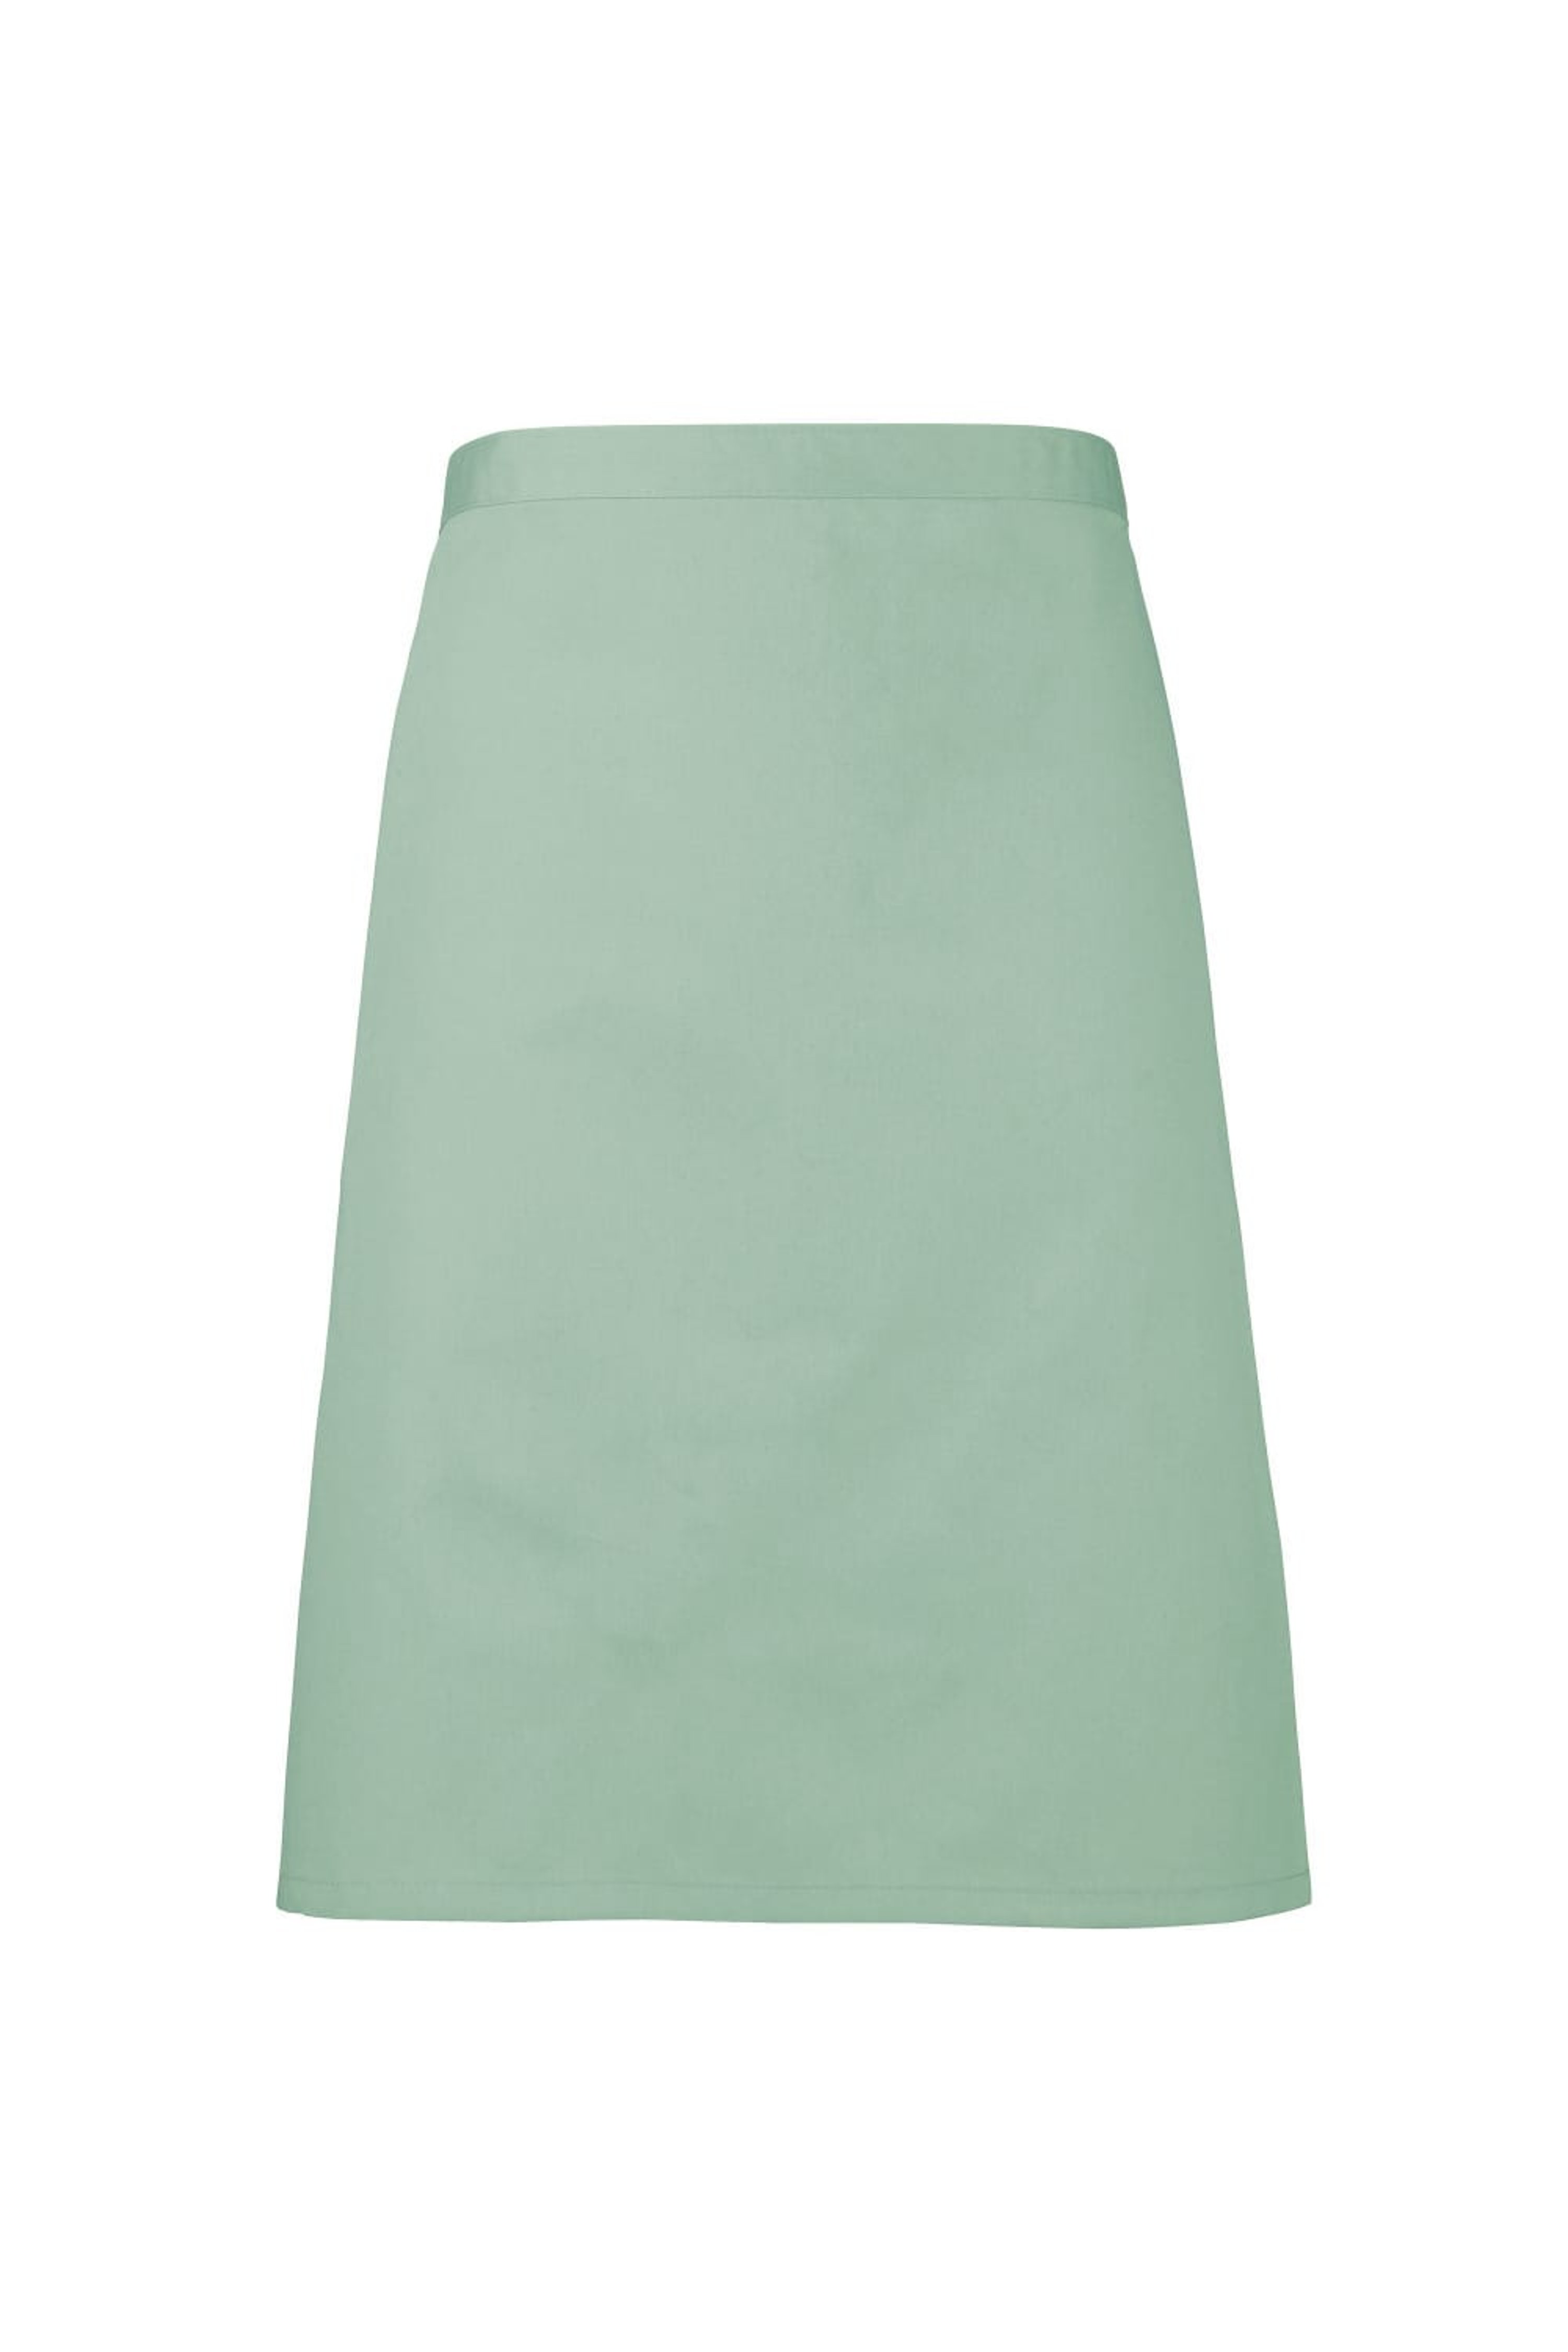 PREMIER PREMIER LADIES/WOMENS MID-LENGTH APRON (PACK OF 2) (TEAL) (ONE SIZE)